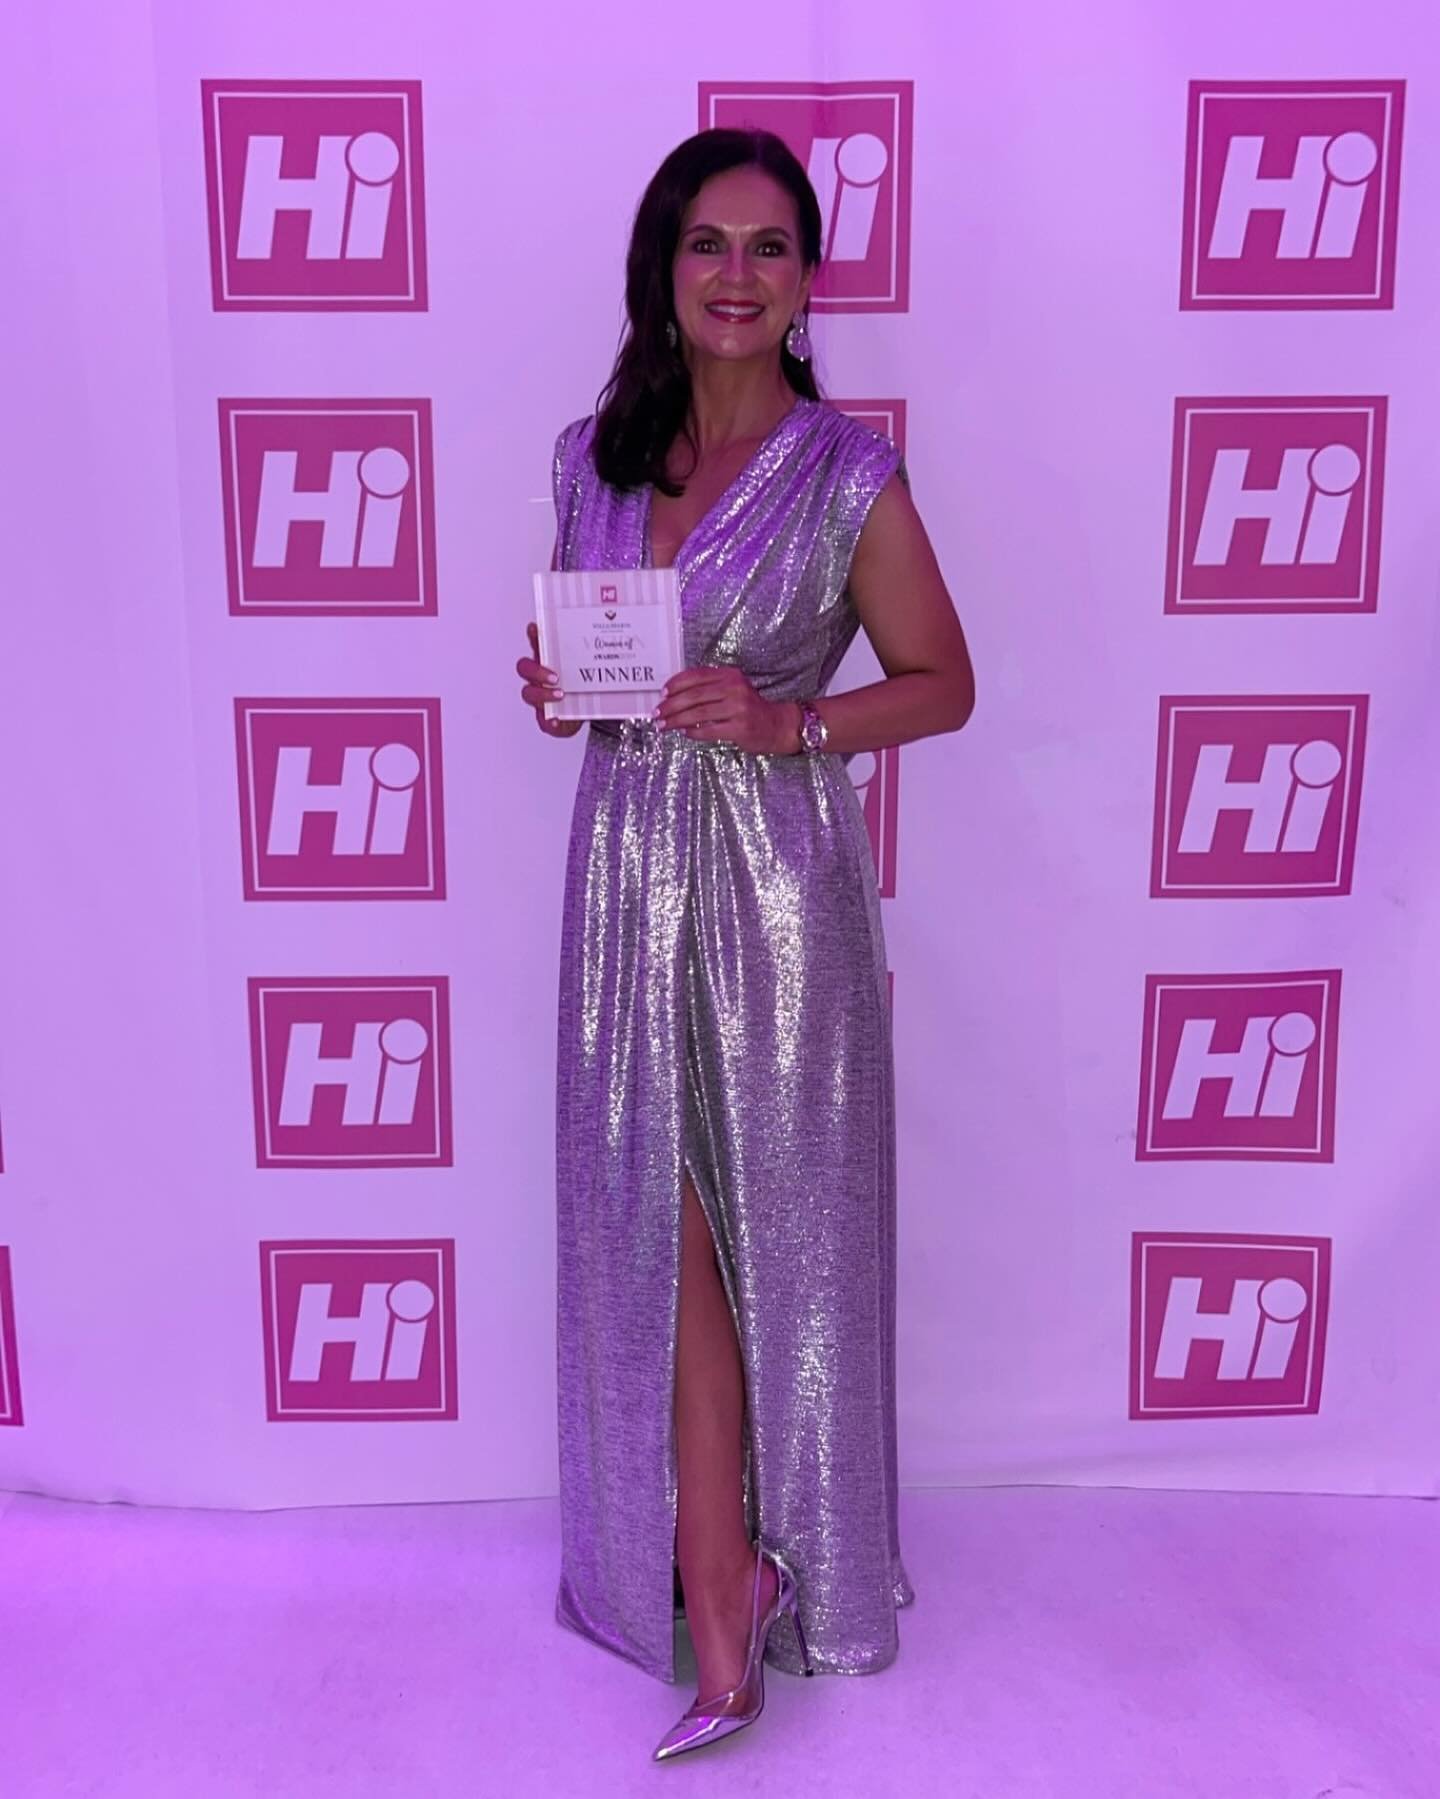 🥳❤️ Some photos from the BEST weekend. So grateful to @histyleie for this award. Thank you so much to my fabulous girls for all they do and to our incredible customers. All your gorgeous messages mean so much to me and I&rsquo;m still making my way 